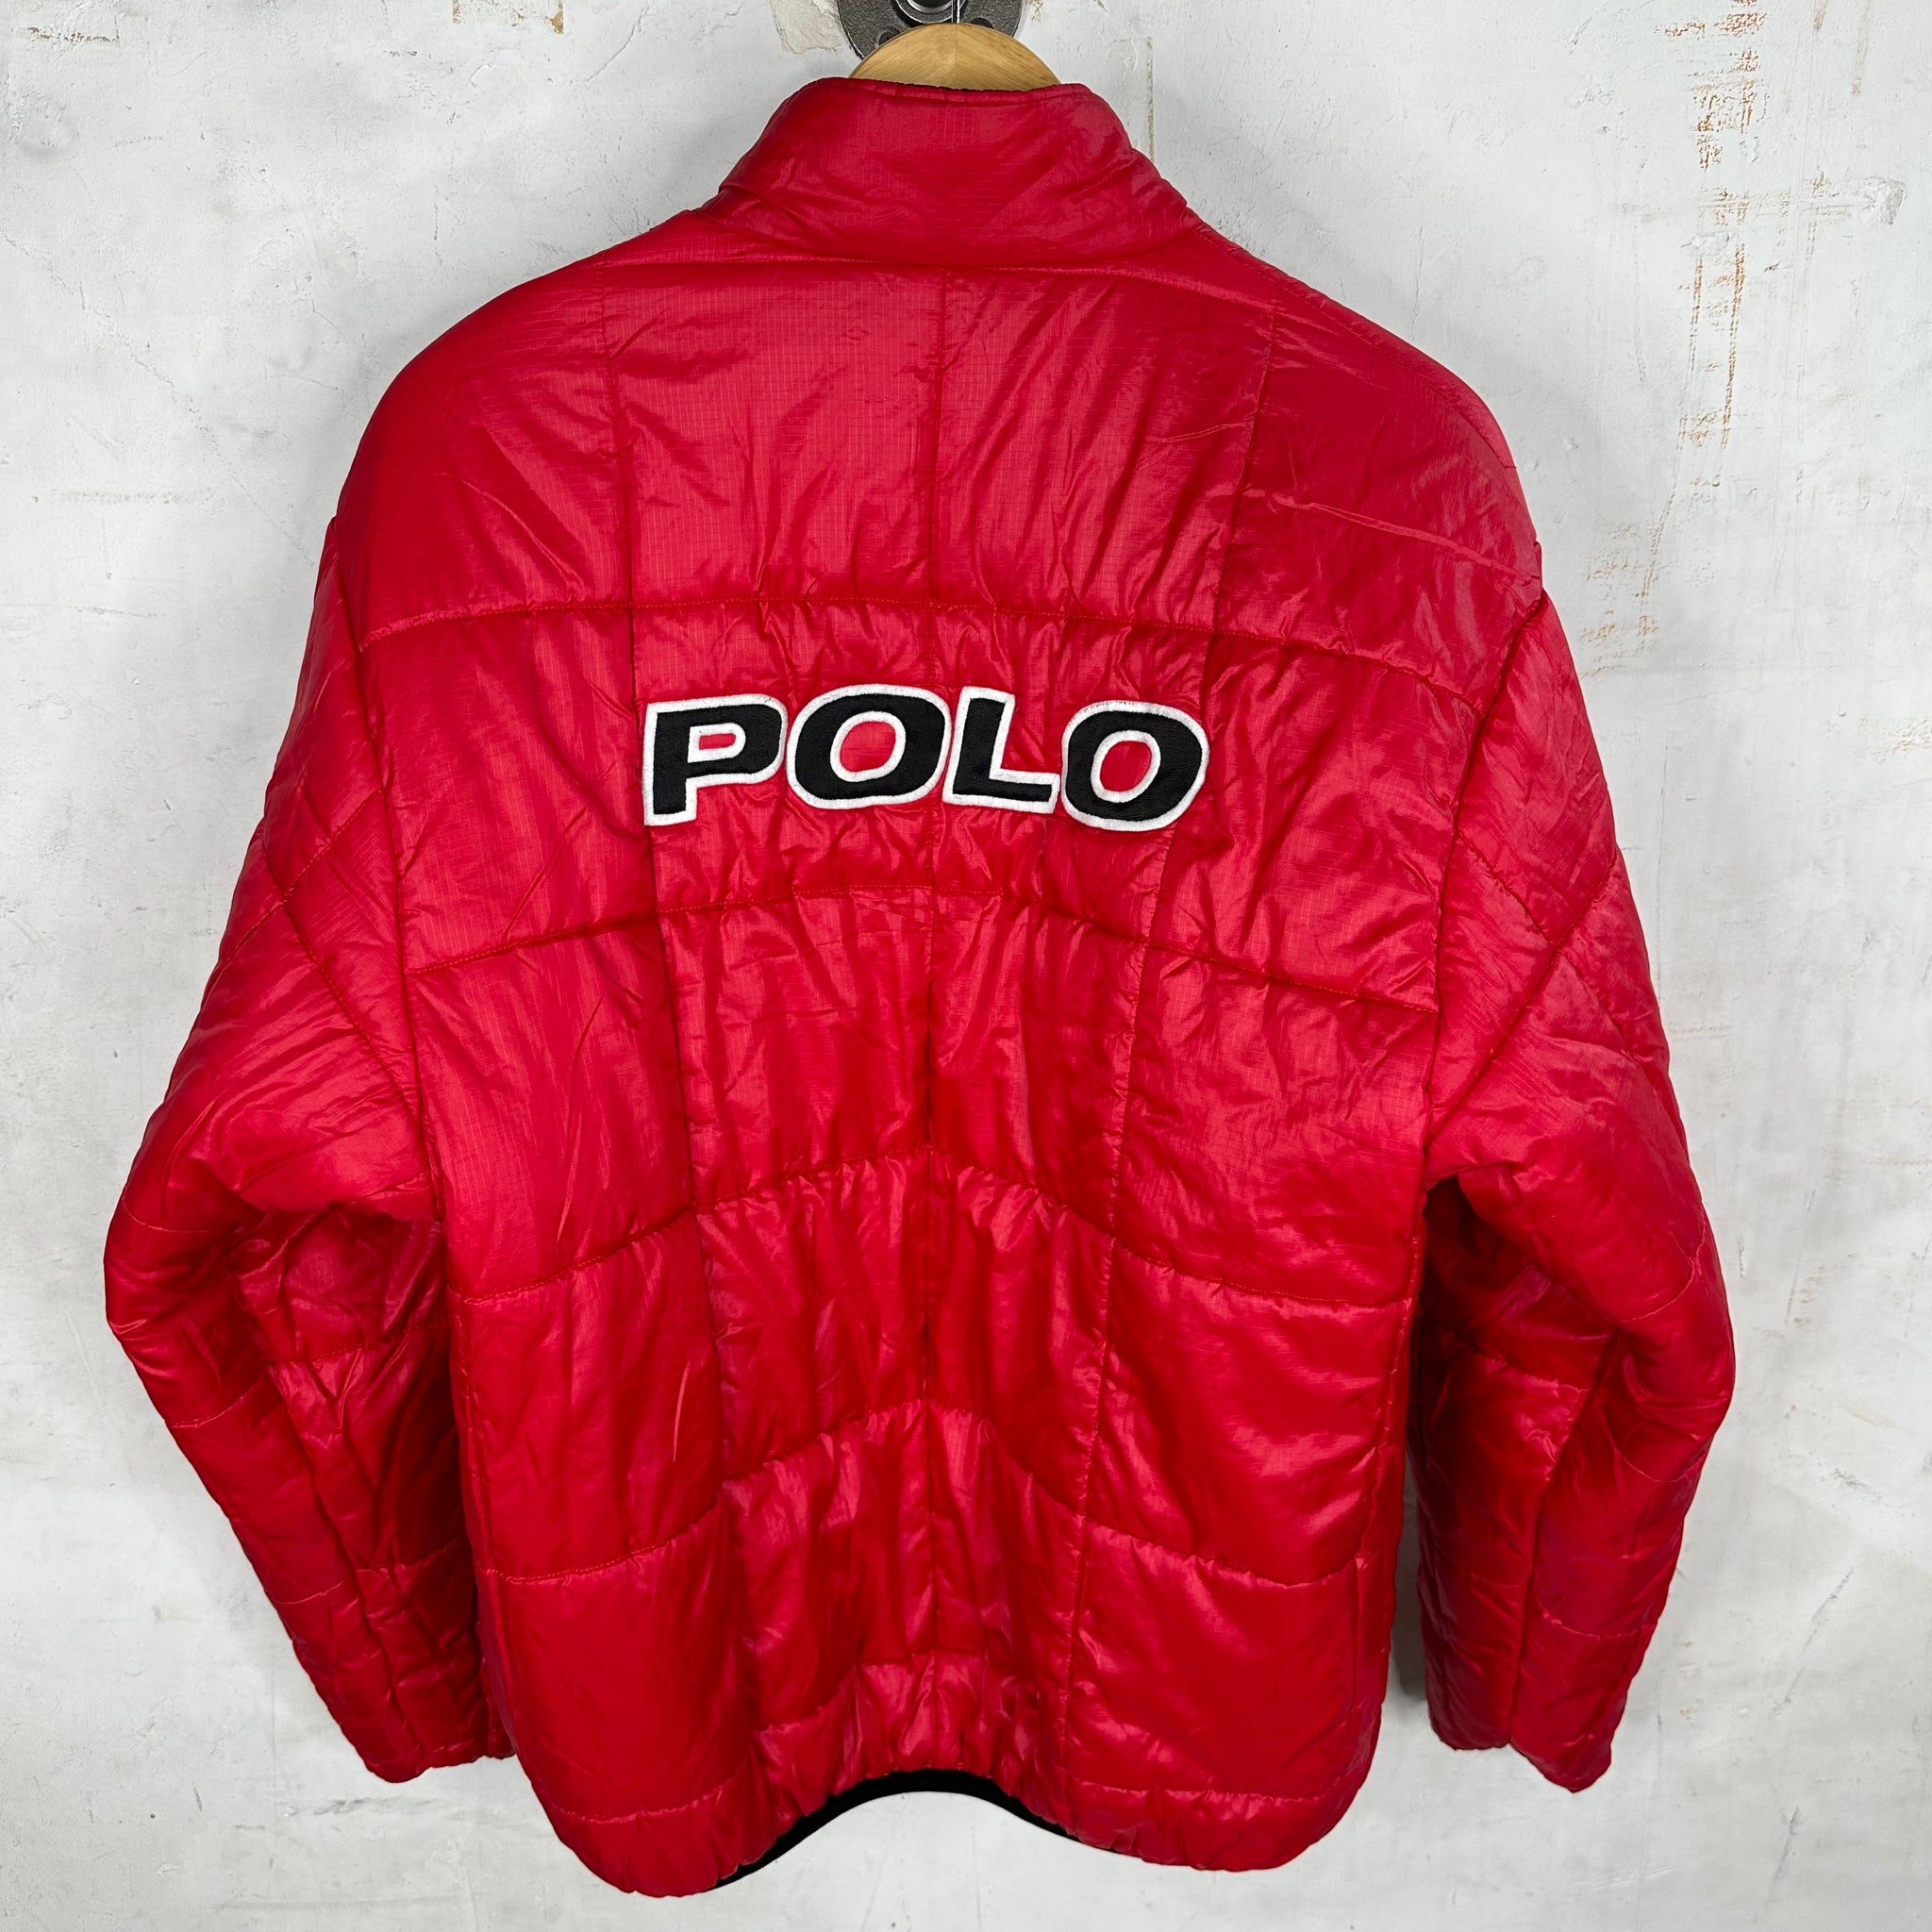 Vintage Polo Sport Reversible Pullover